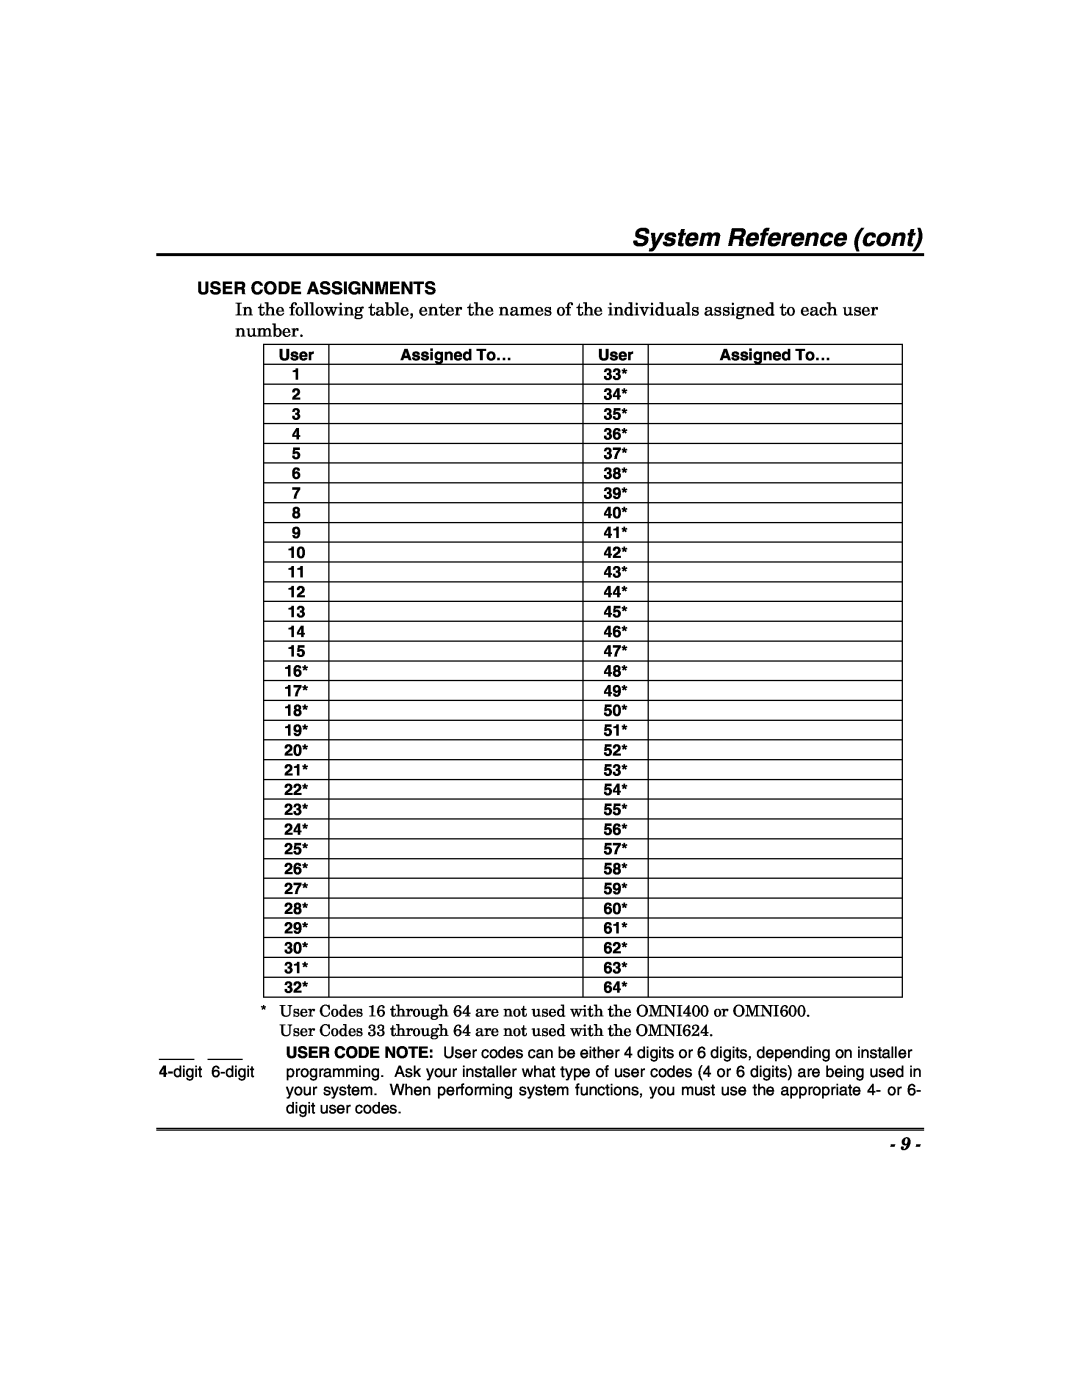 Honeywell 600, 400, 624, 848 manual User Code Assignments, System Reference cont 